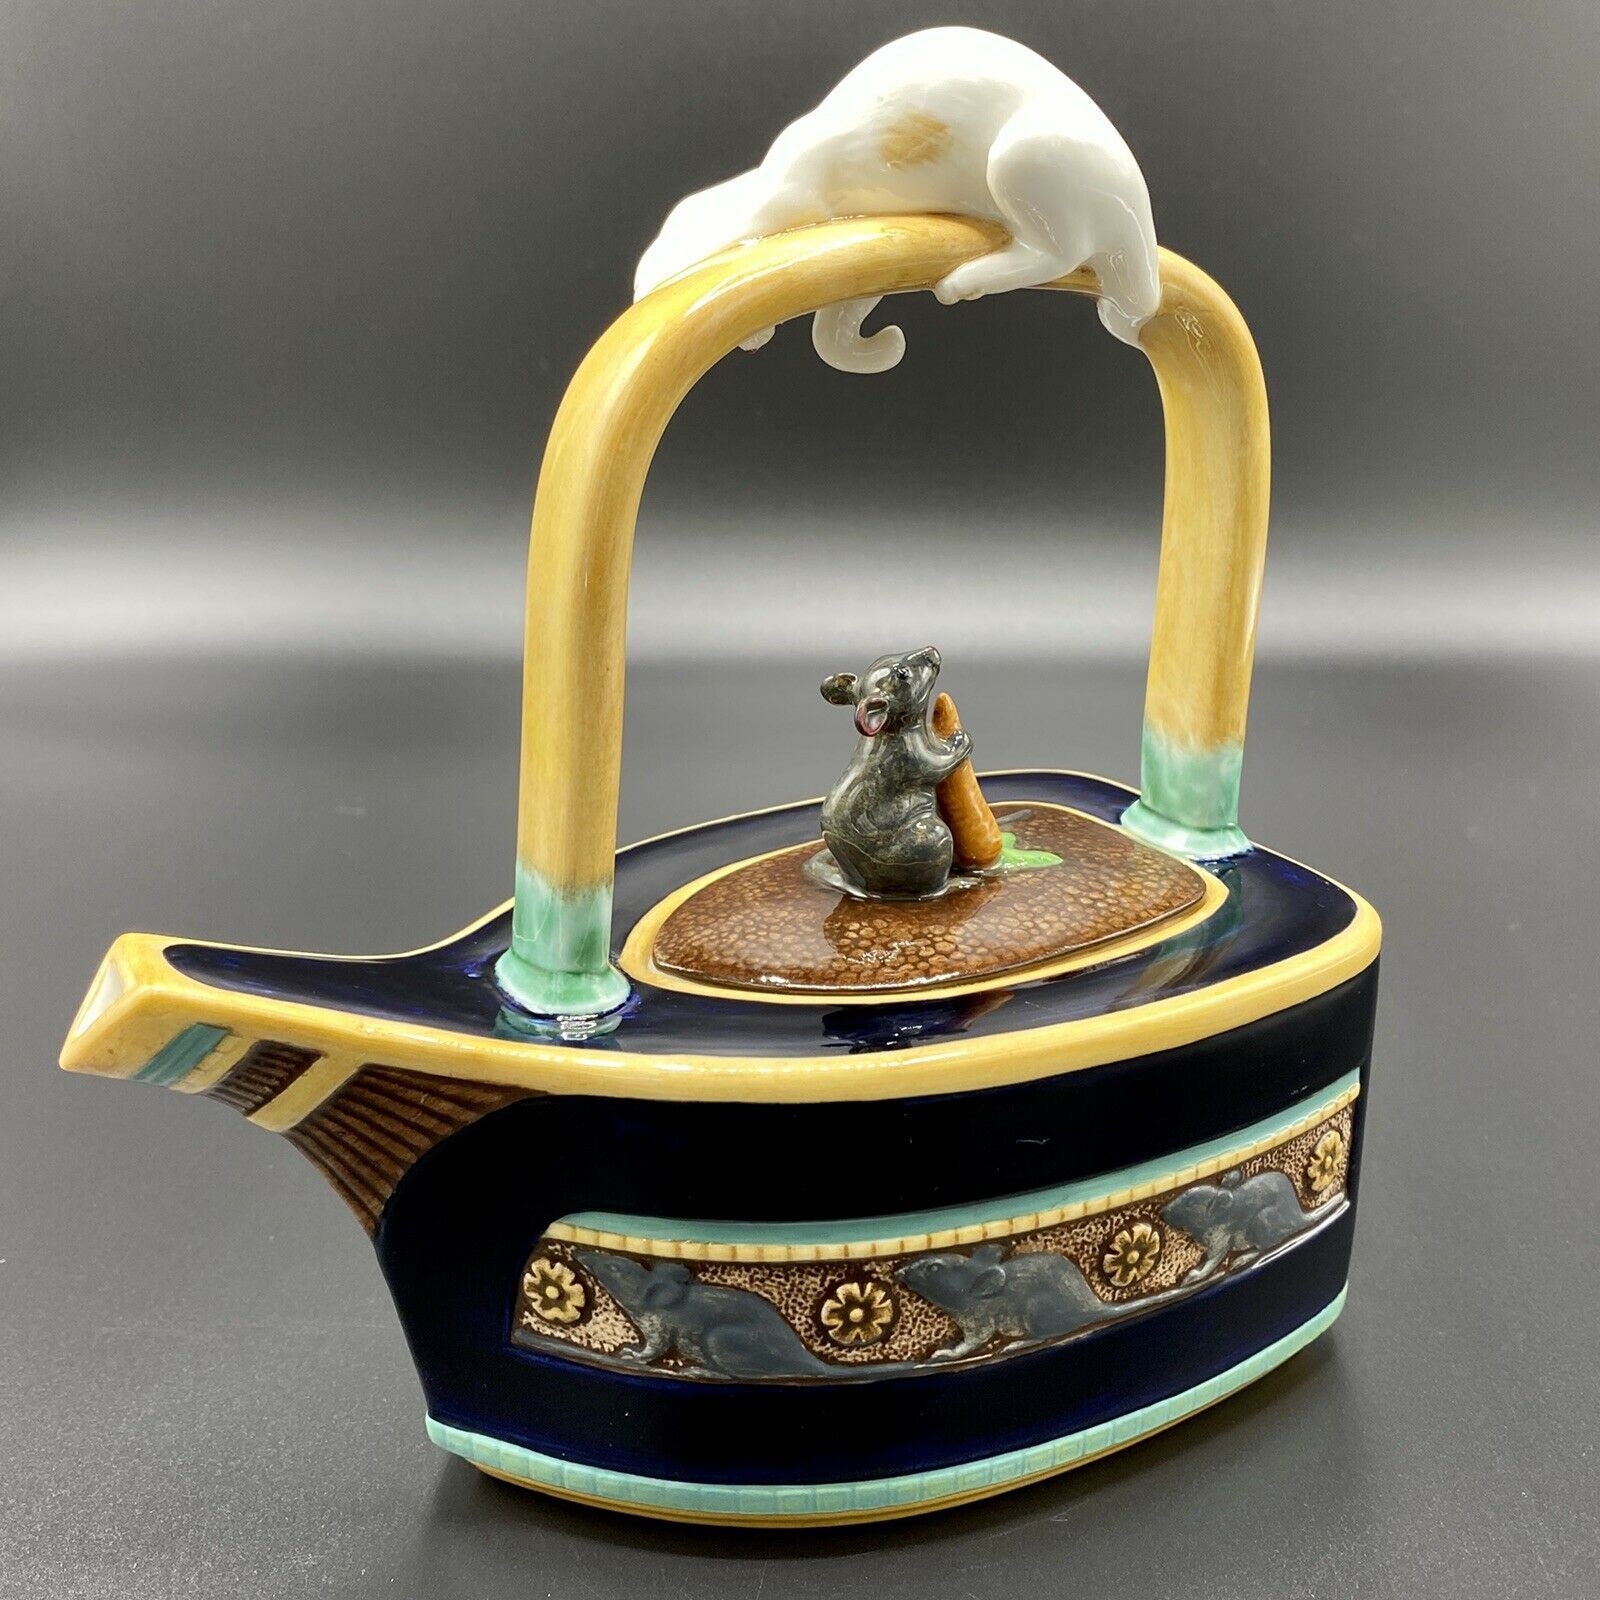 Palace Museum's Teapot and Teacup – Yellow Sweaters